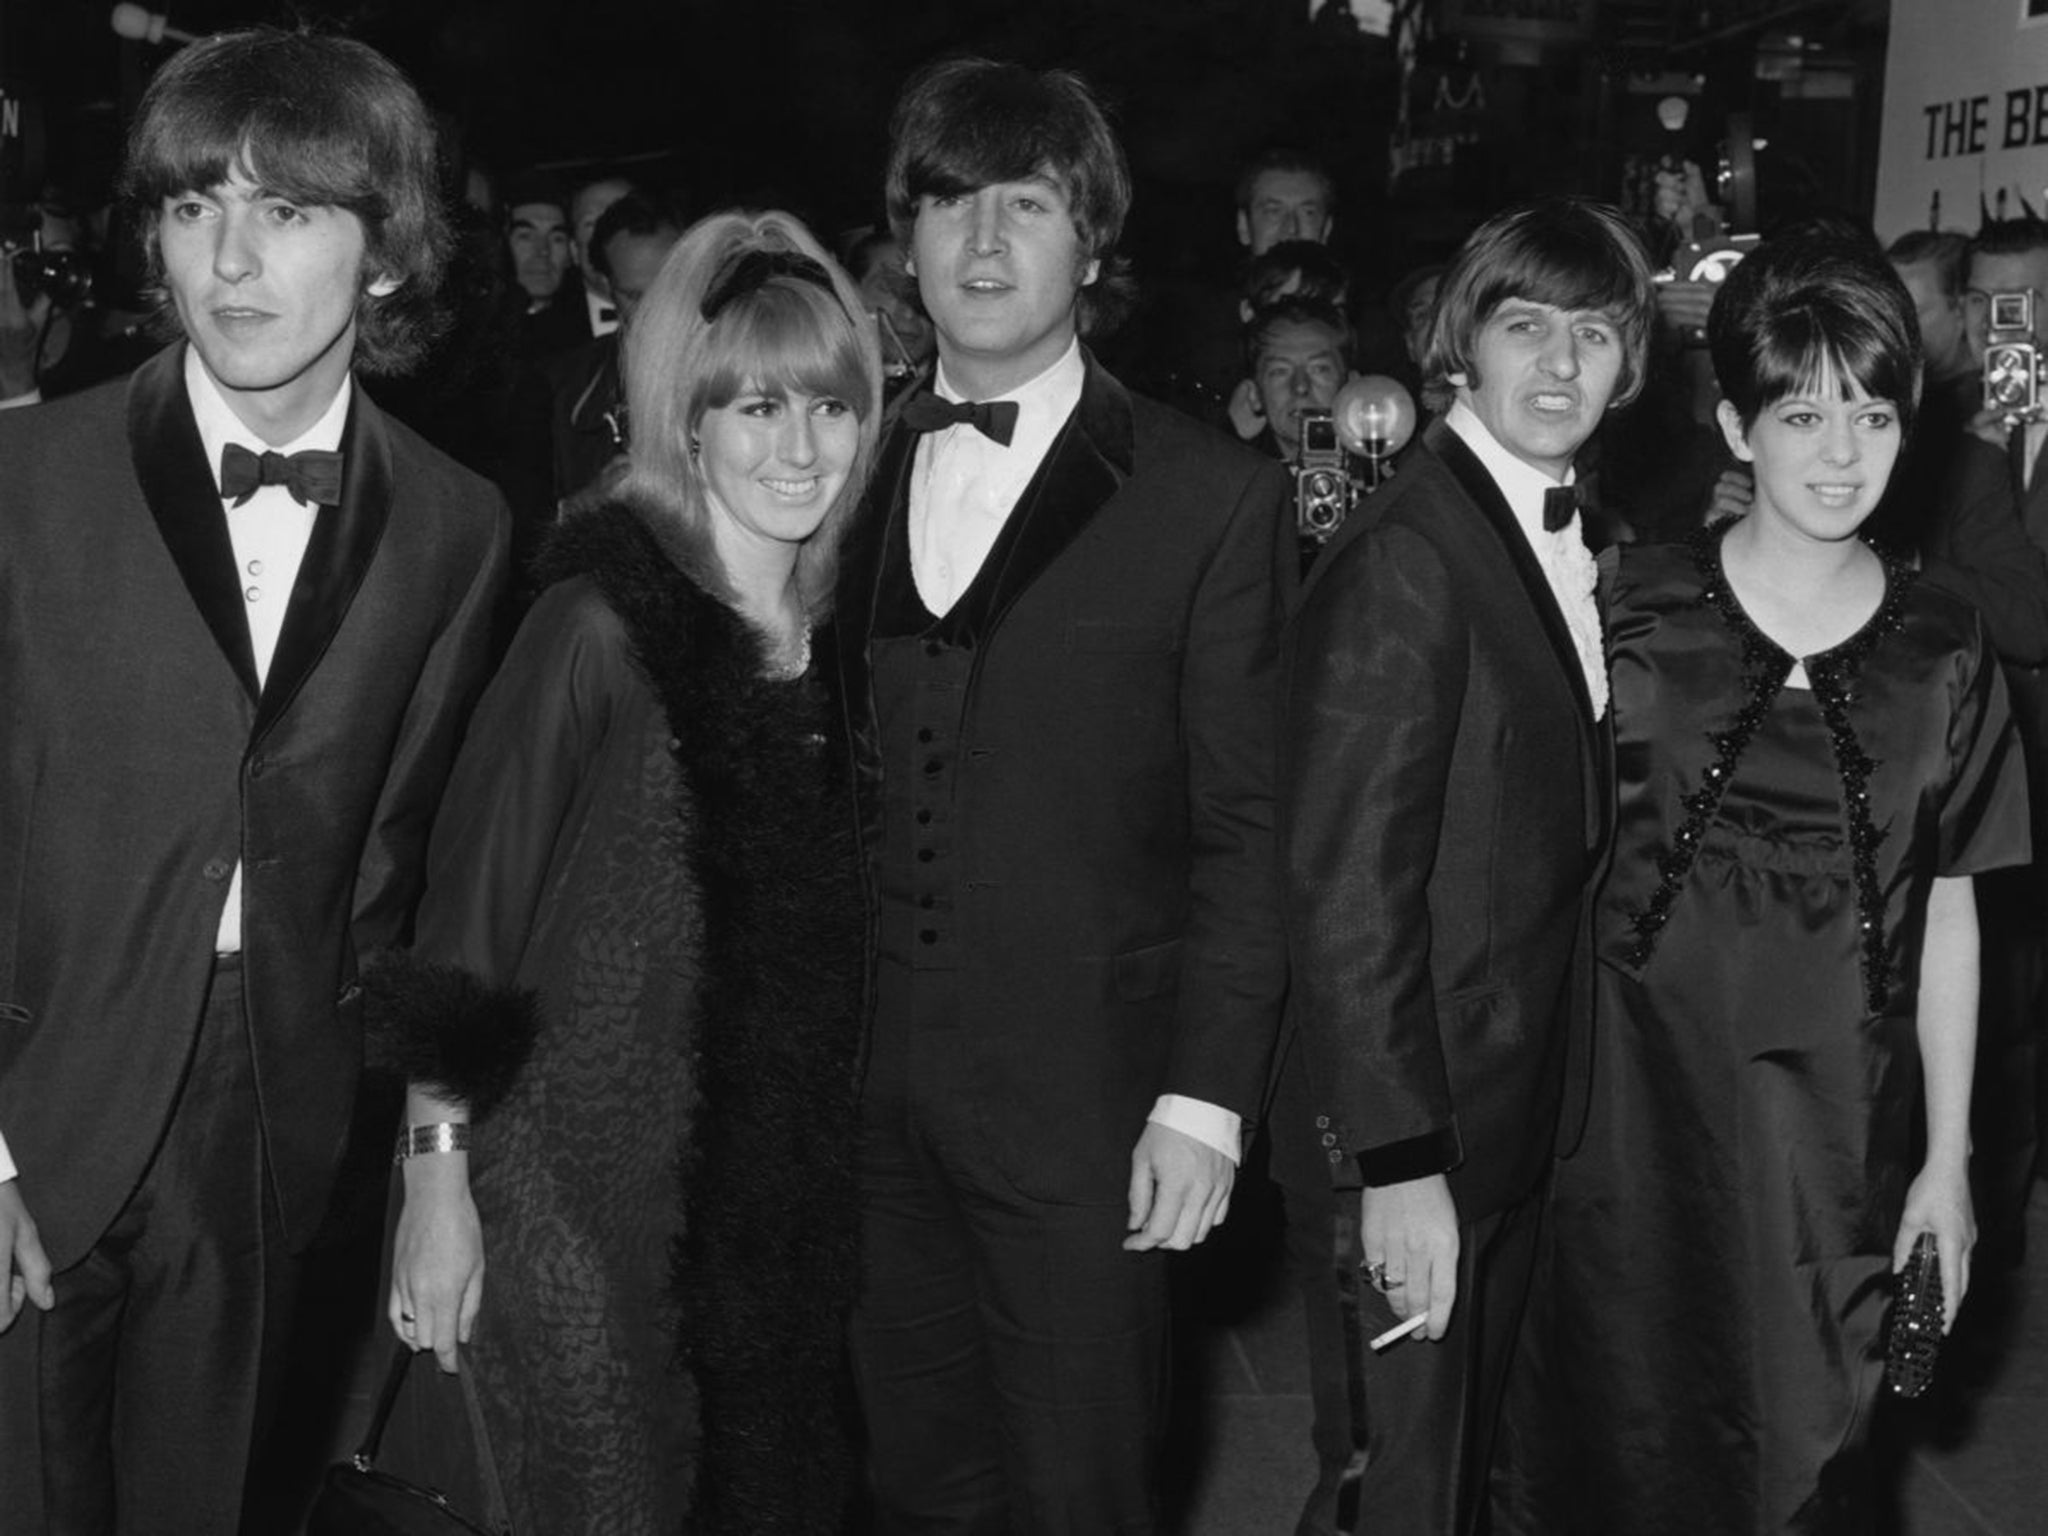 John and Cynthia Lennon, centre, arrive at the 1965 London premiere of the Beatles film Help!